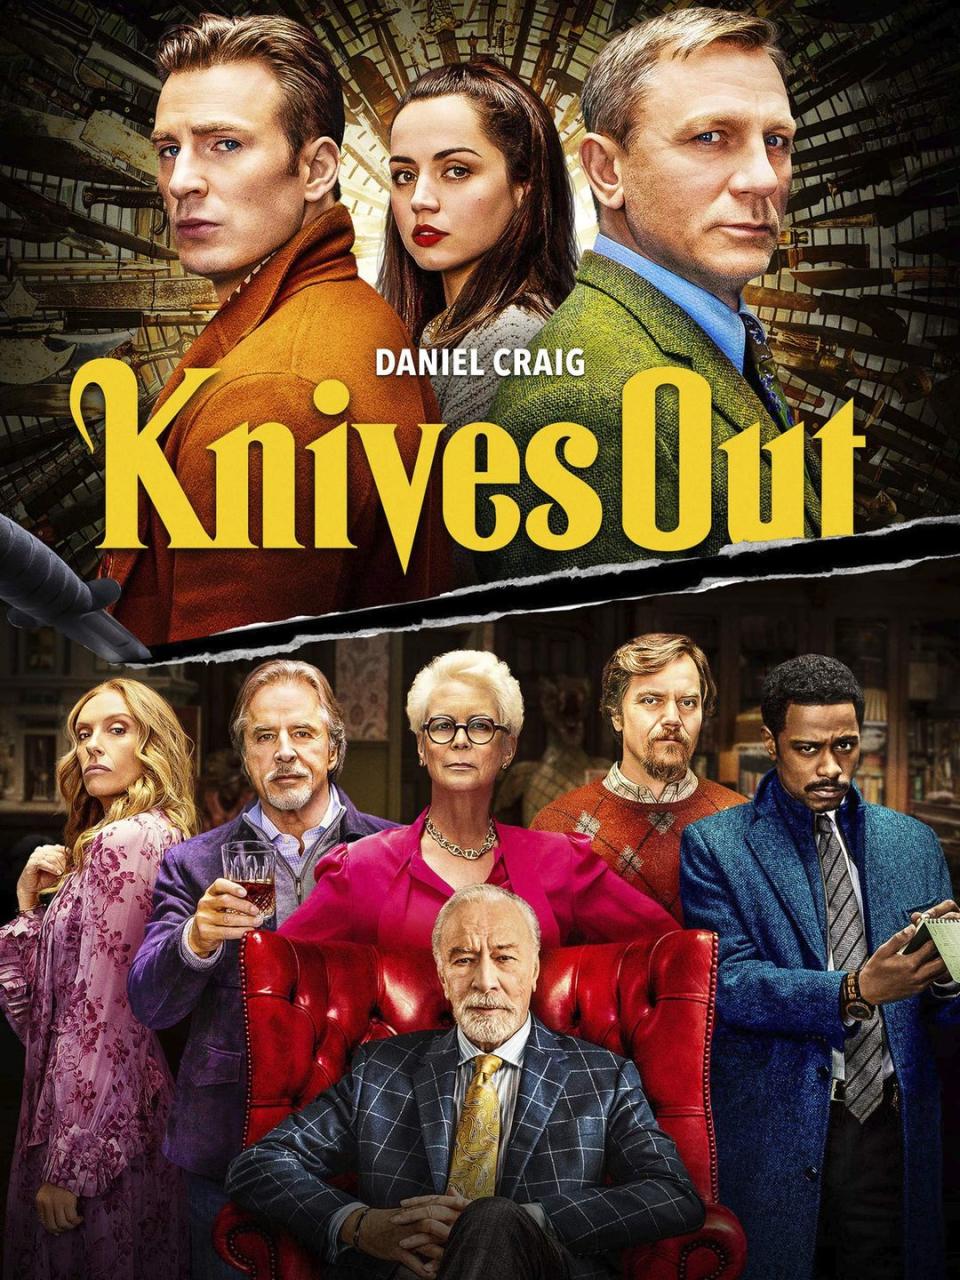 "Knives Out"